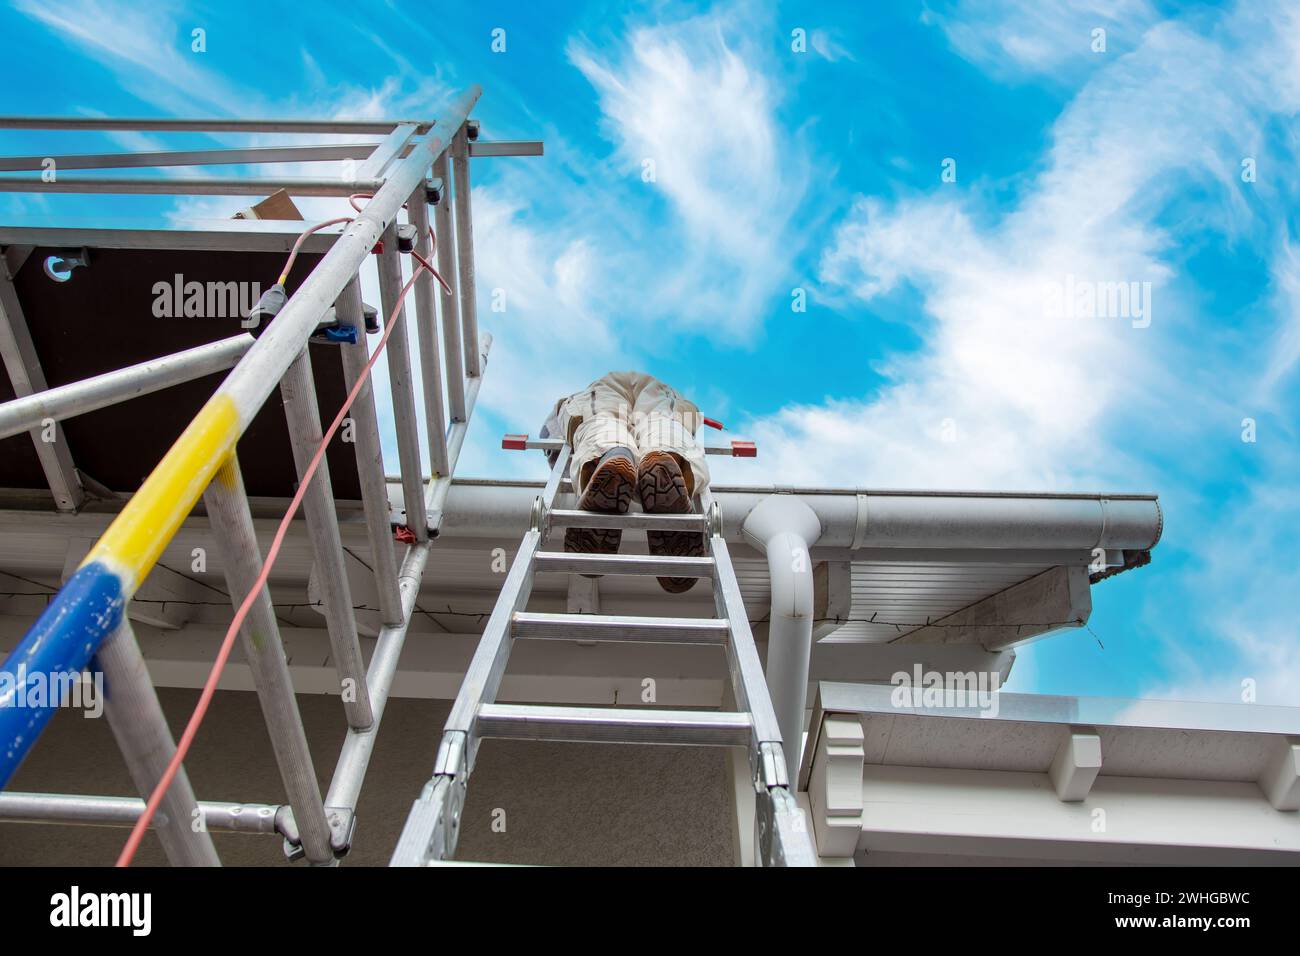 Roofer, worker on the rooftop, standing on a ladder. Roofing work. scaffolding on construction site Stock Photo